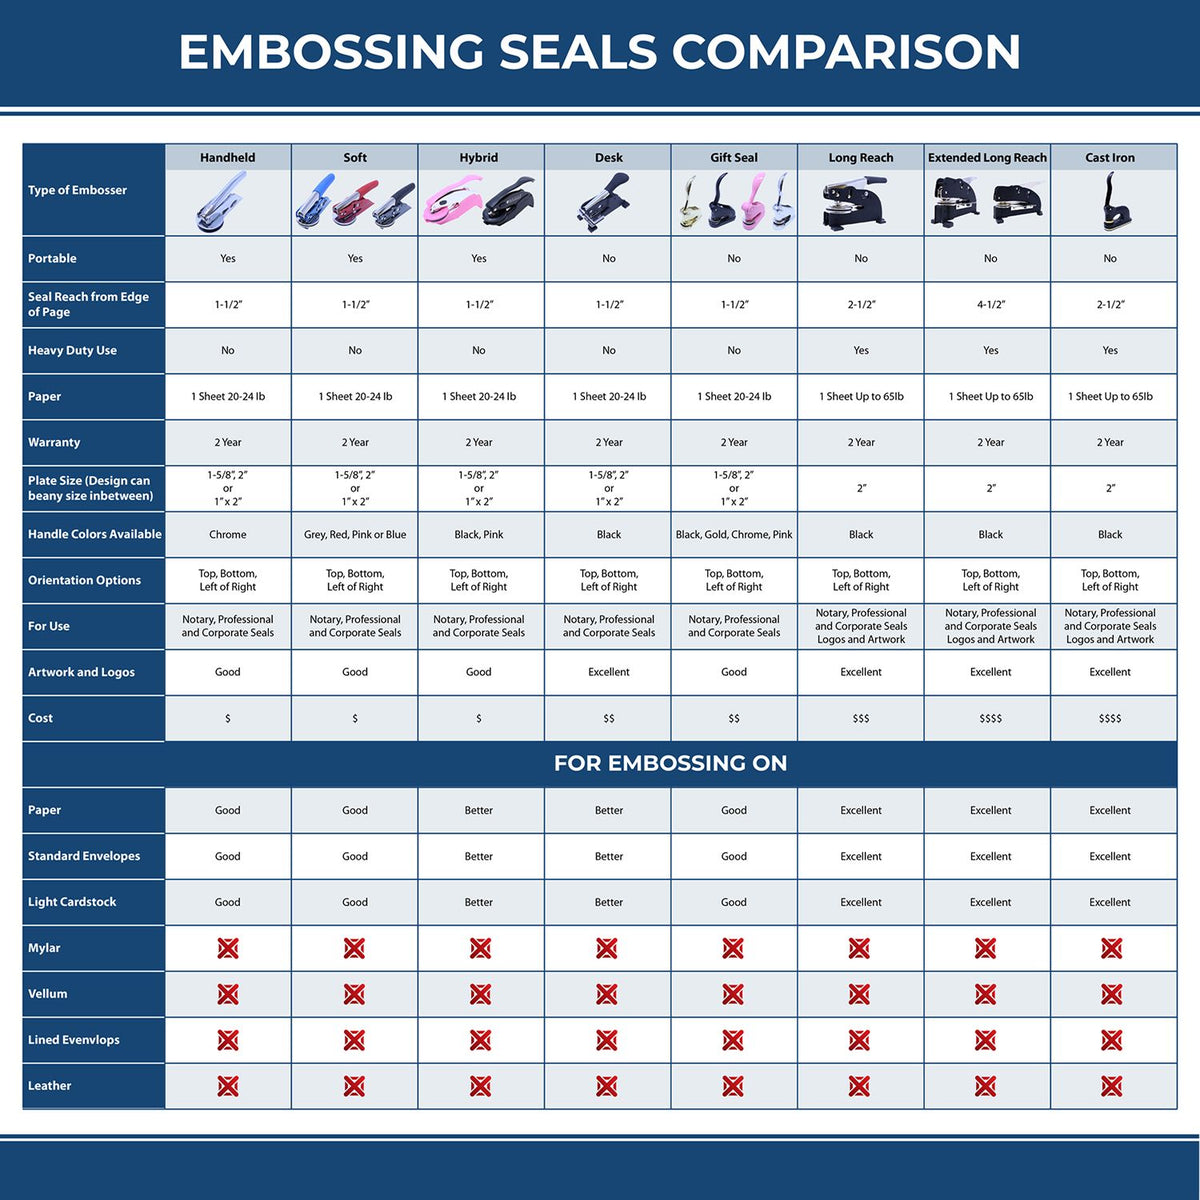 A comparison chart for the different types of mount models available for the Heavy Duty Cast Iron Arkansas Engineer Seal Embosser.